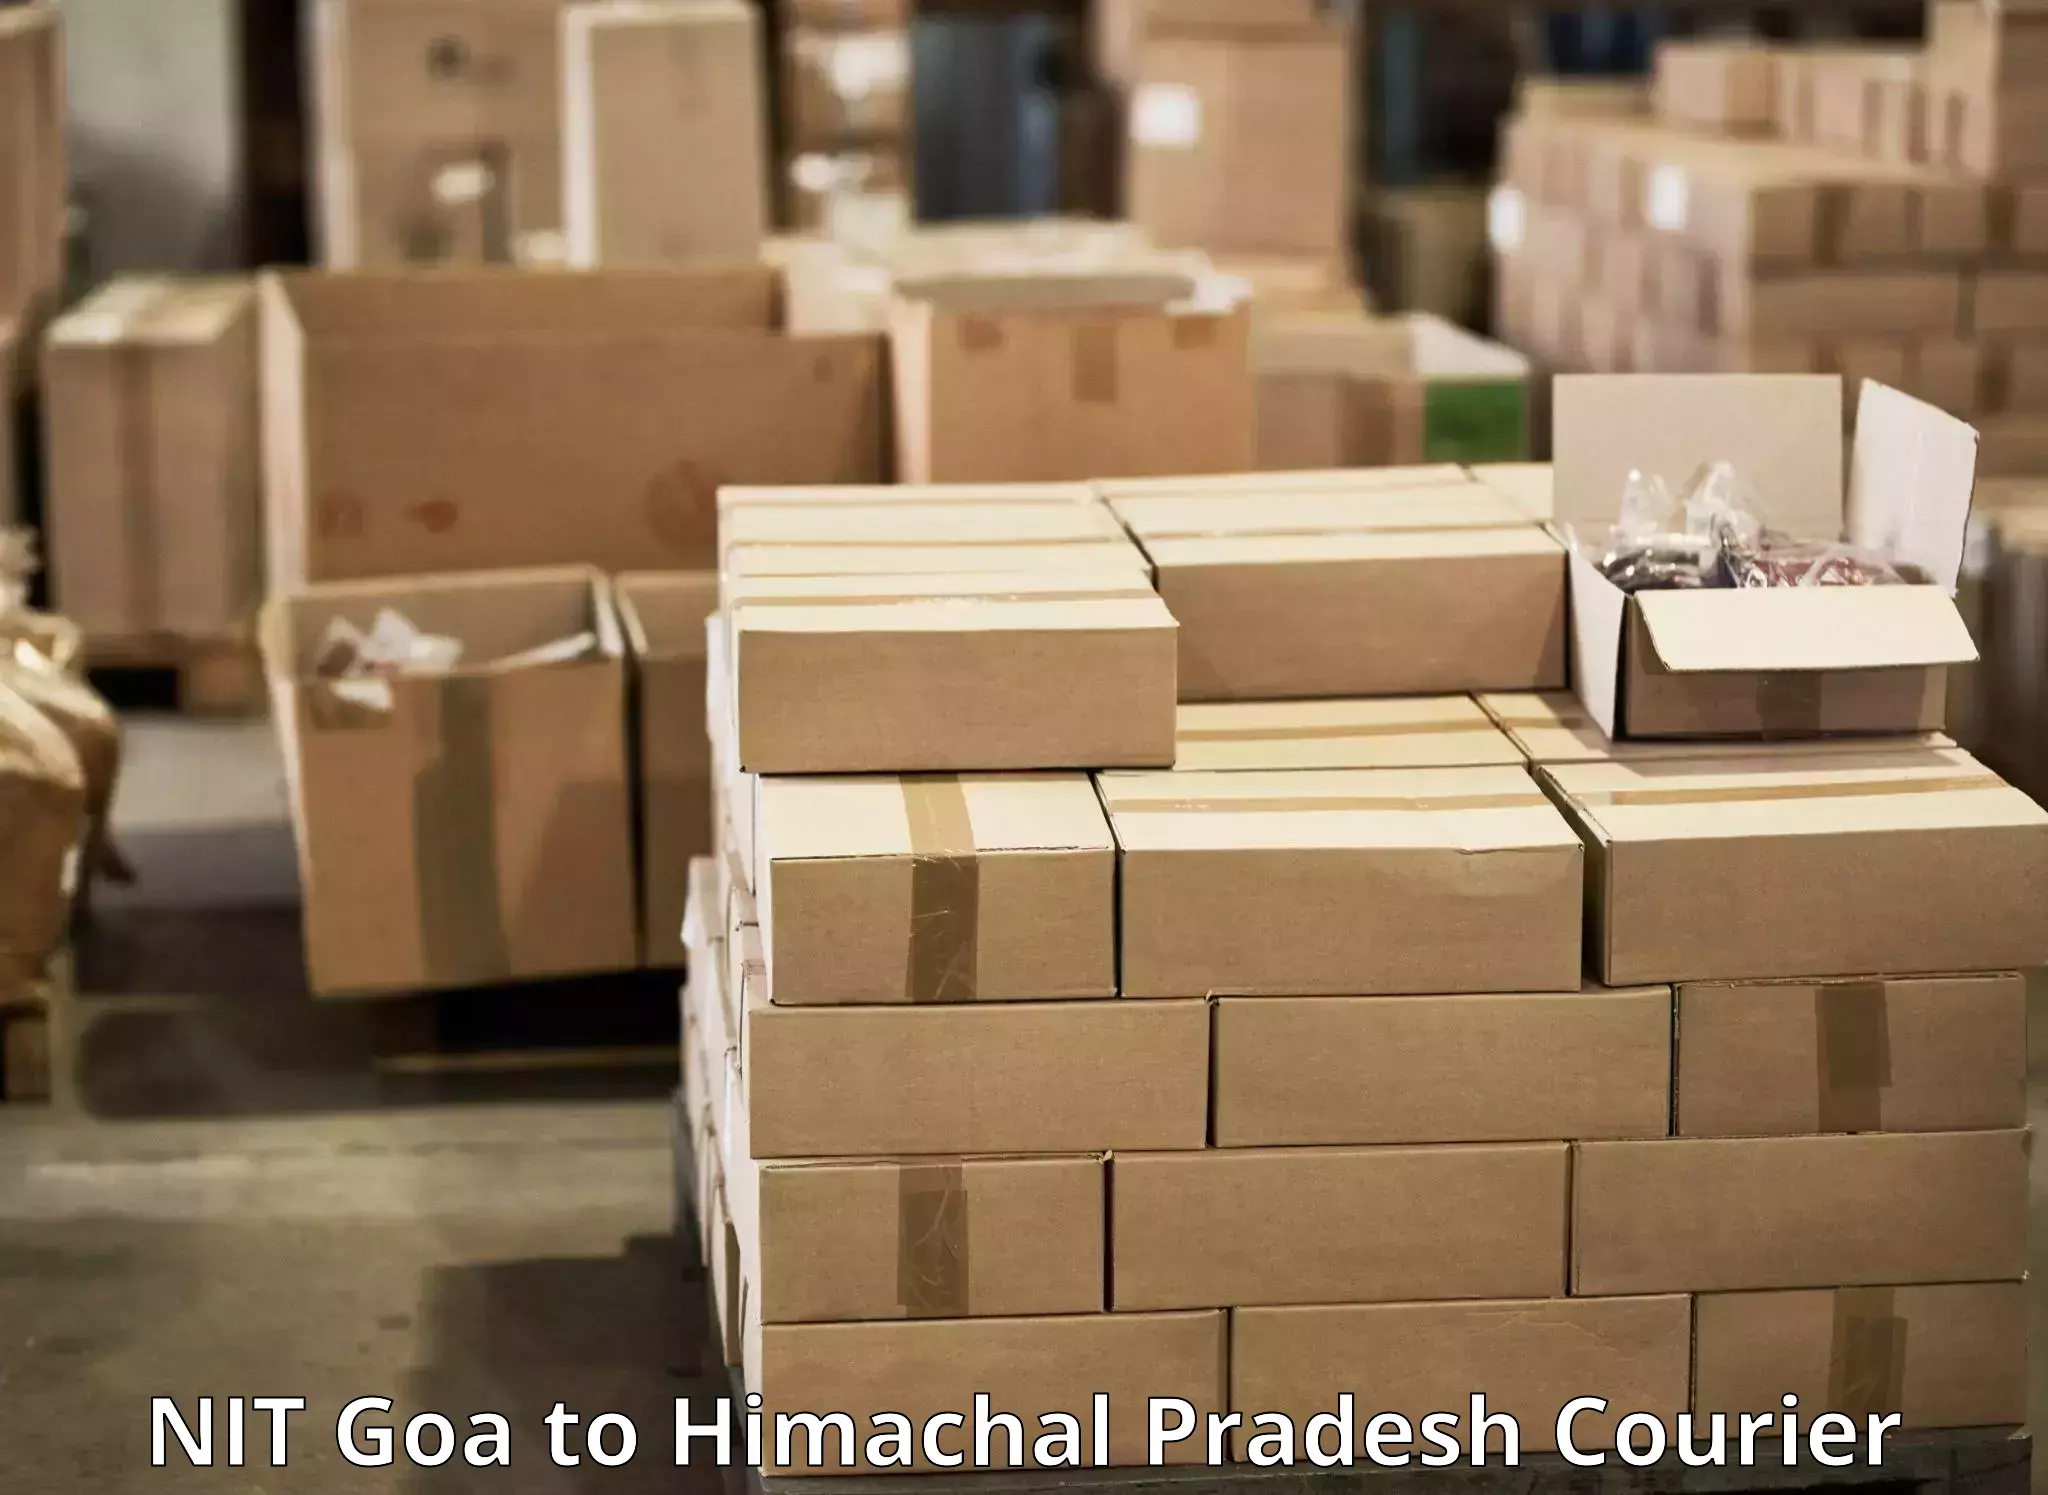 Corporate courier solutions NIT Goa to Himachal Pradesh